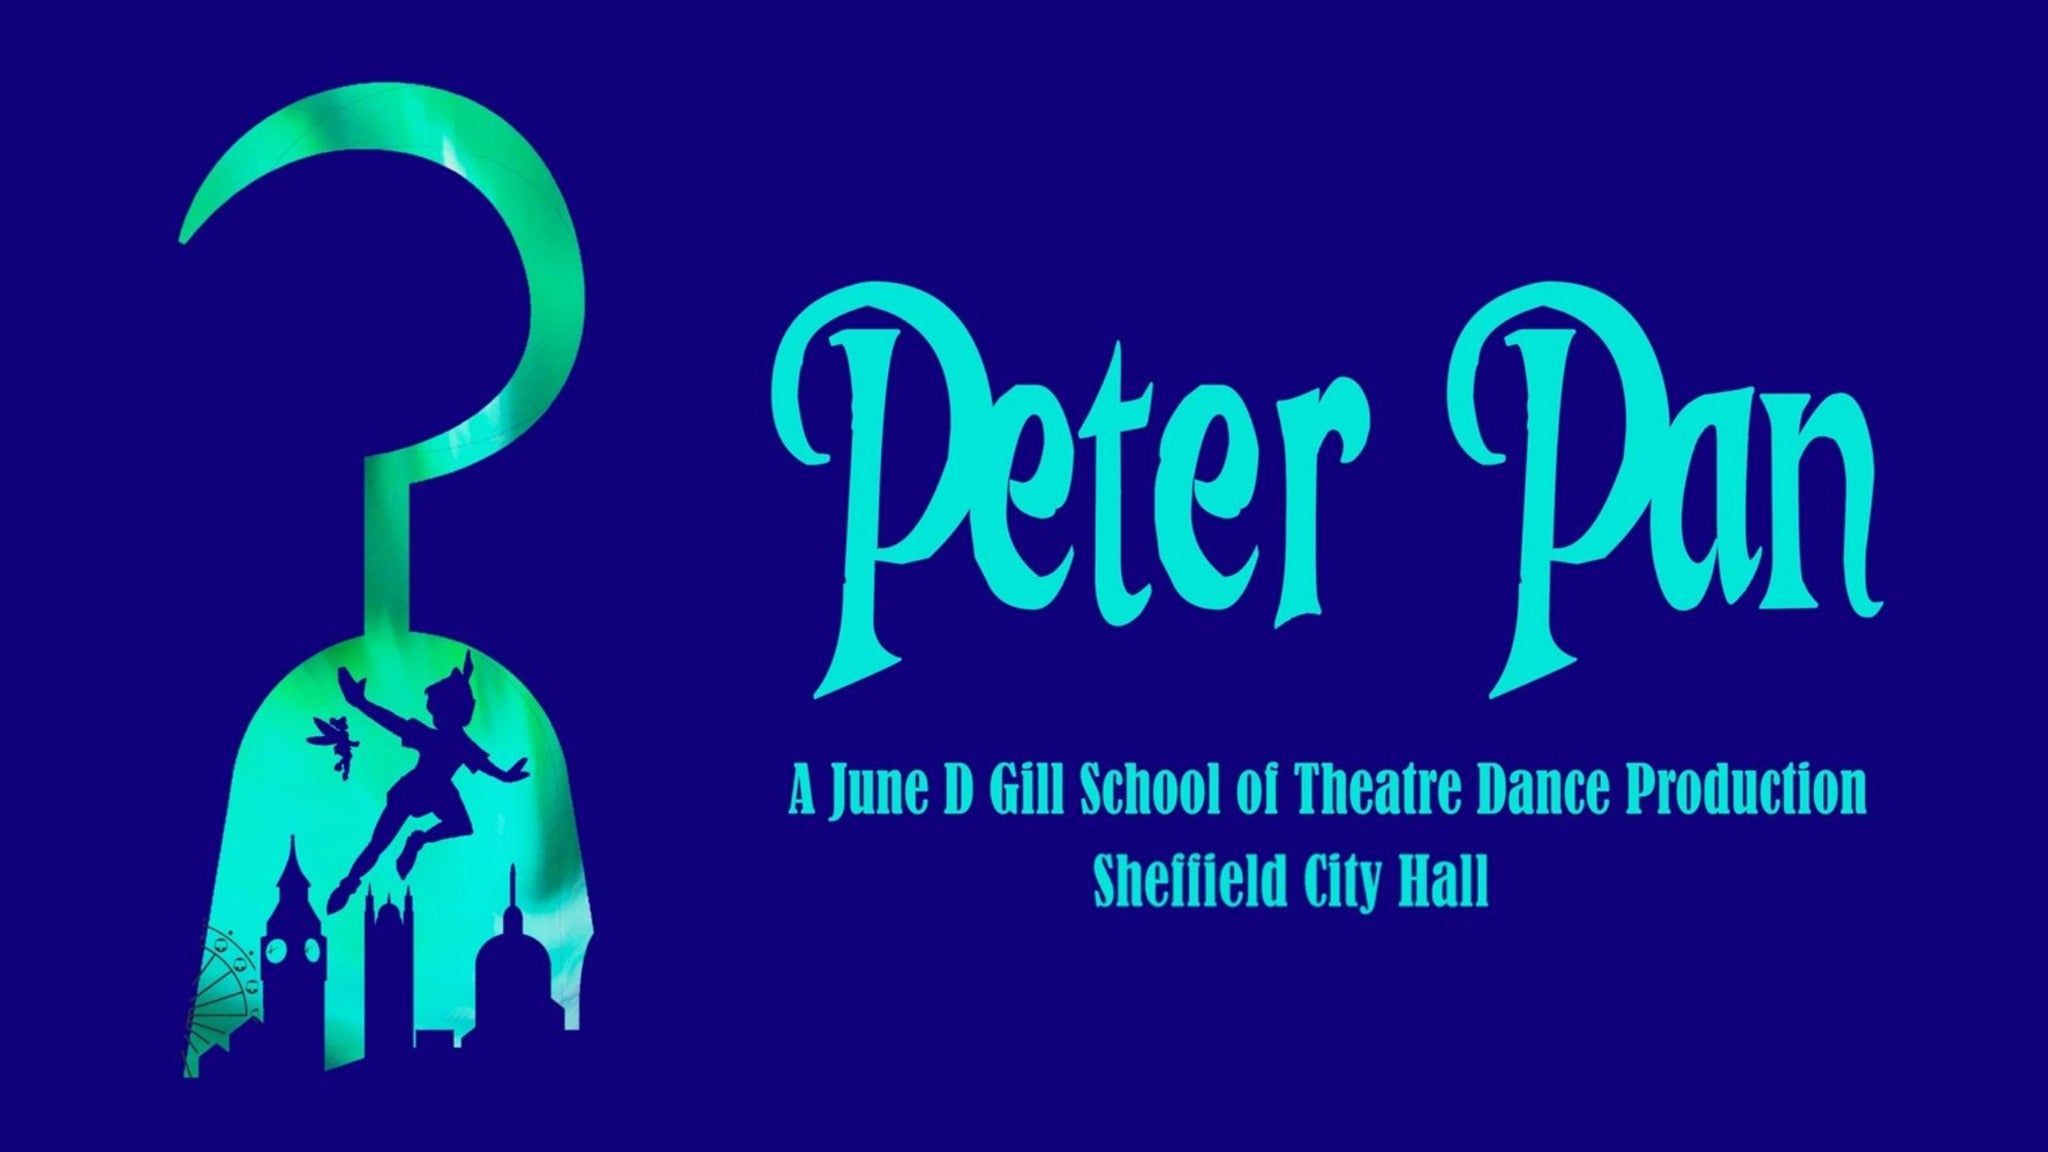 Image used with permission from Ticketmaster | PETER PAN tickets